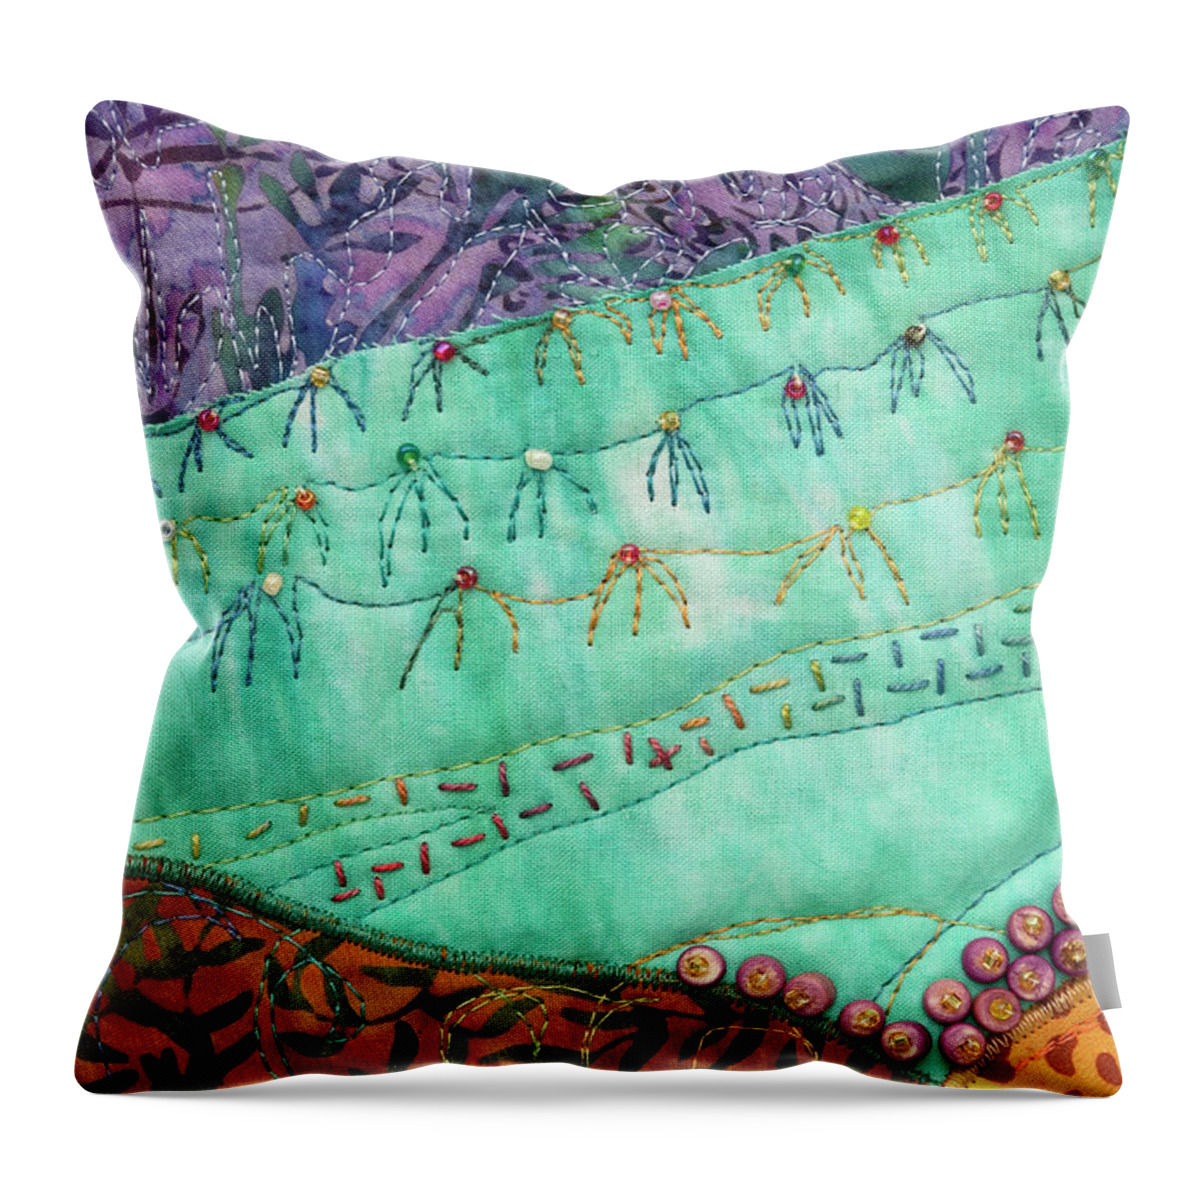 Shrine To Land And Sky Throw Pillow featuring the mixed media Shrine to Land and Sky D by Vivian Aumond